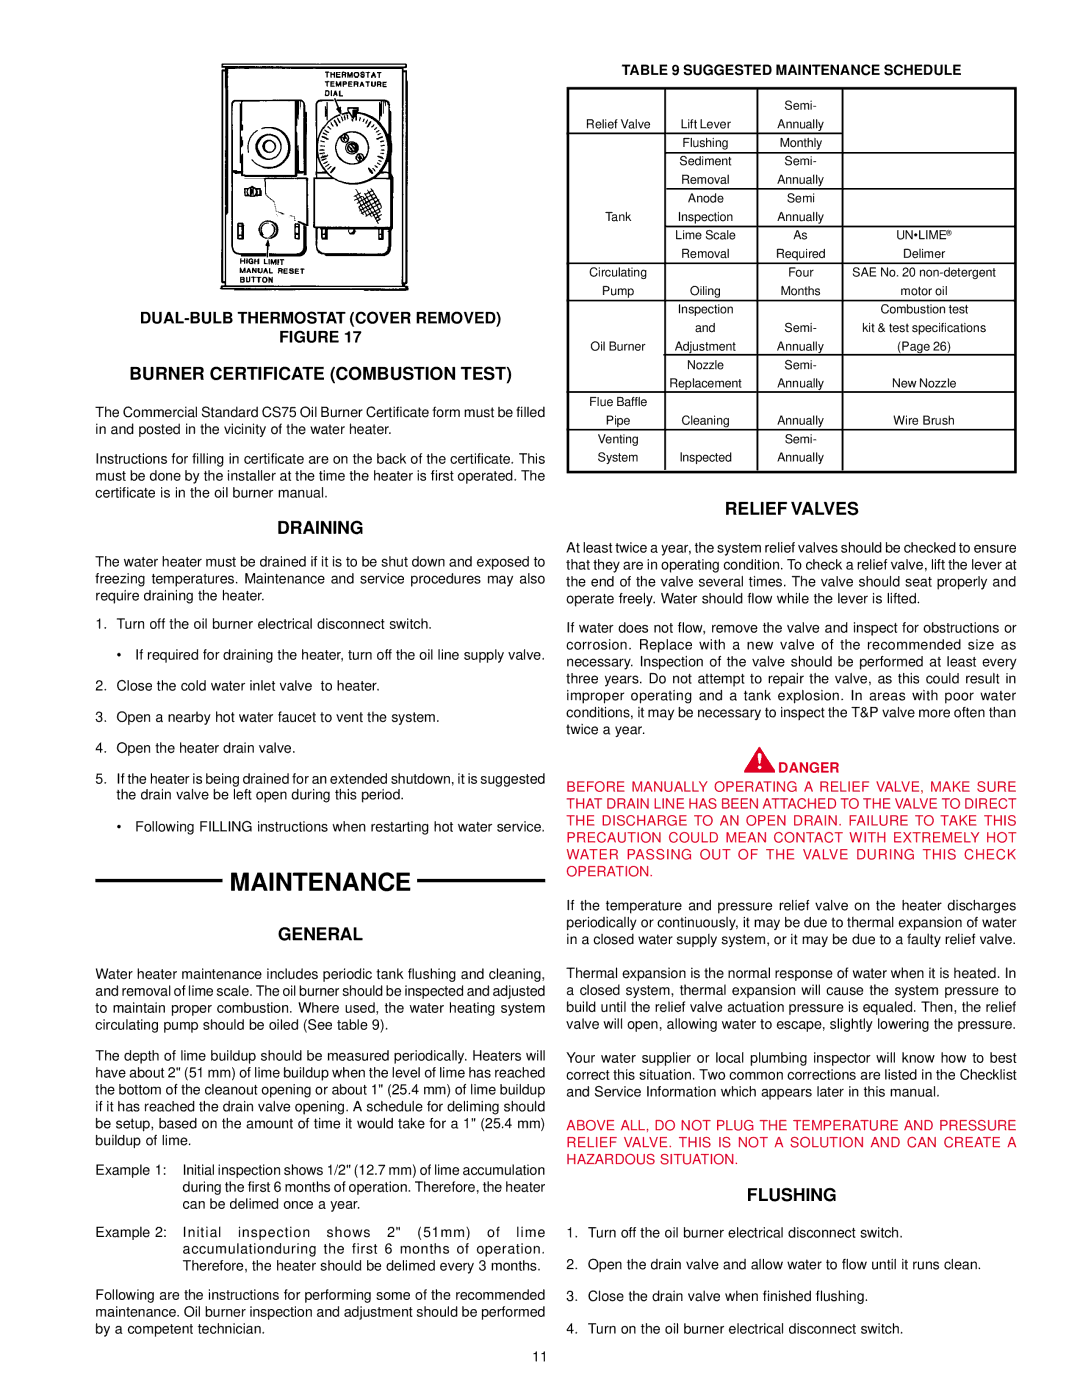 State Industries GPO 86-199 manual Maintenance, Burner Certificate Combustion Test, Draining, Relief Valves, Flushing 